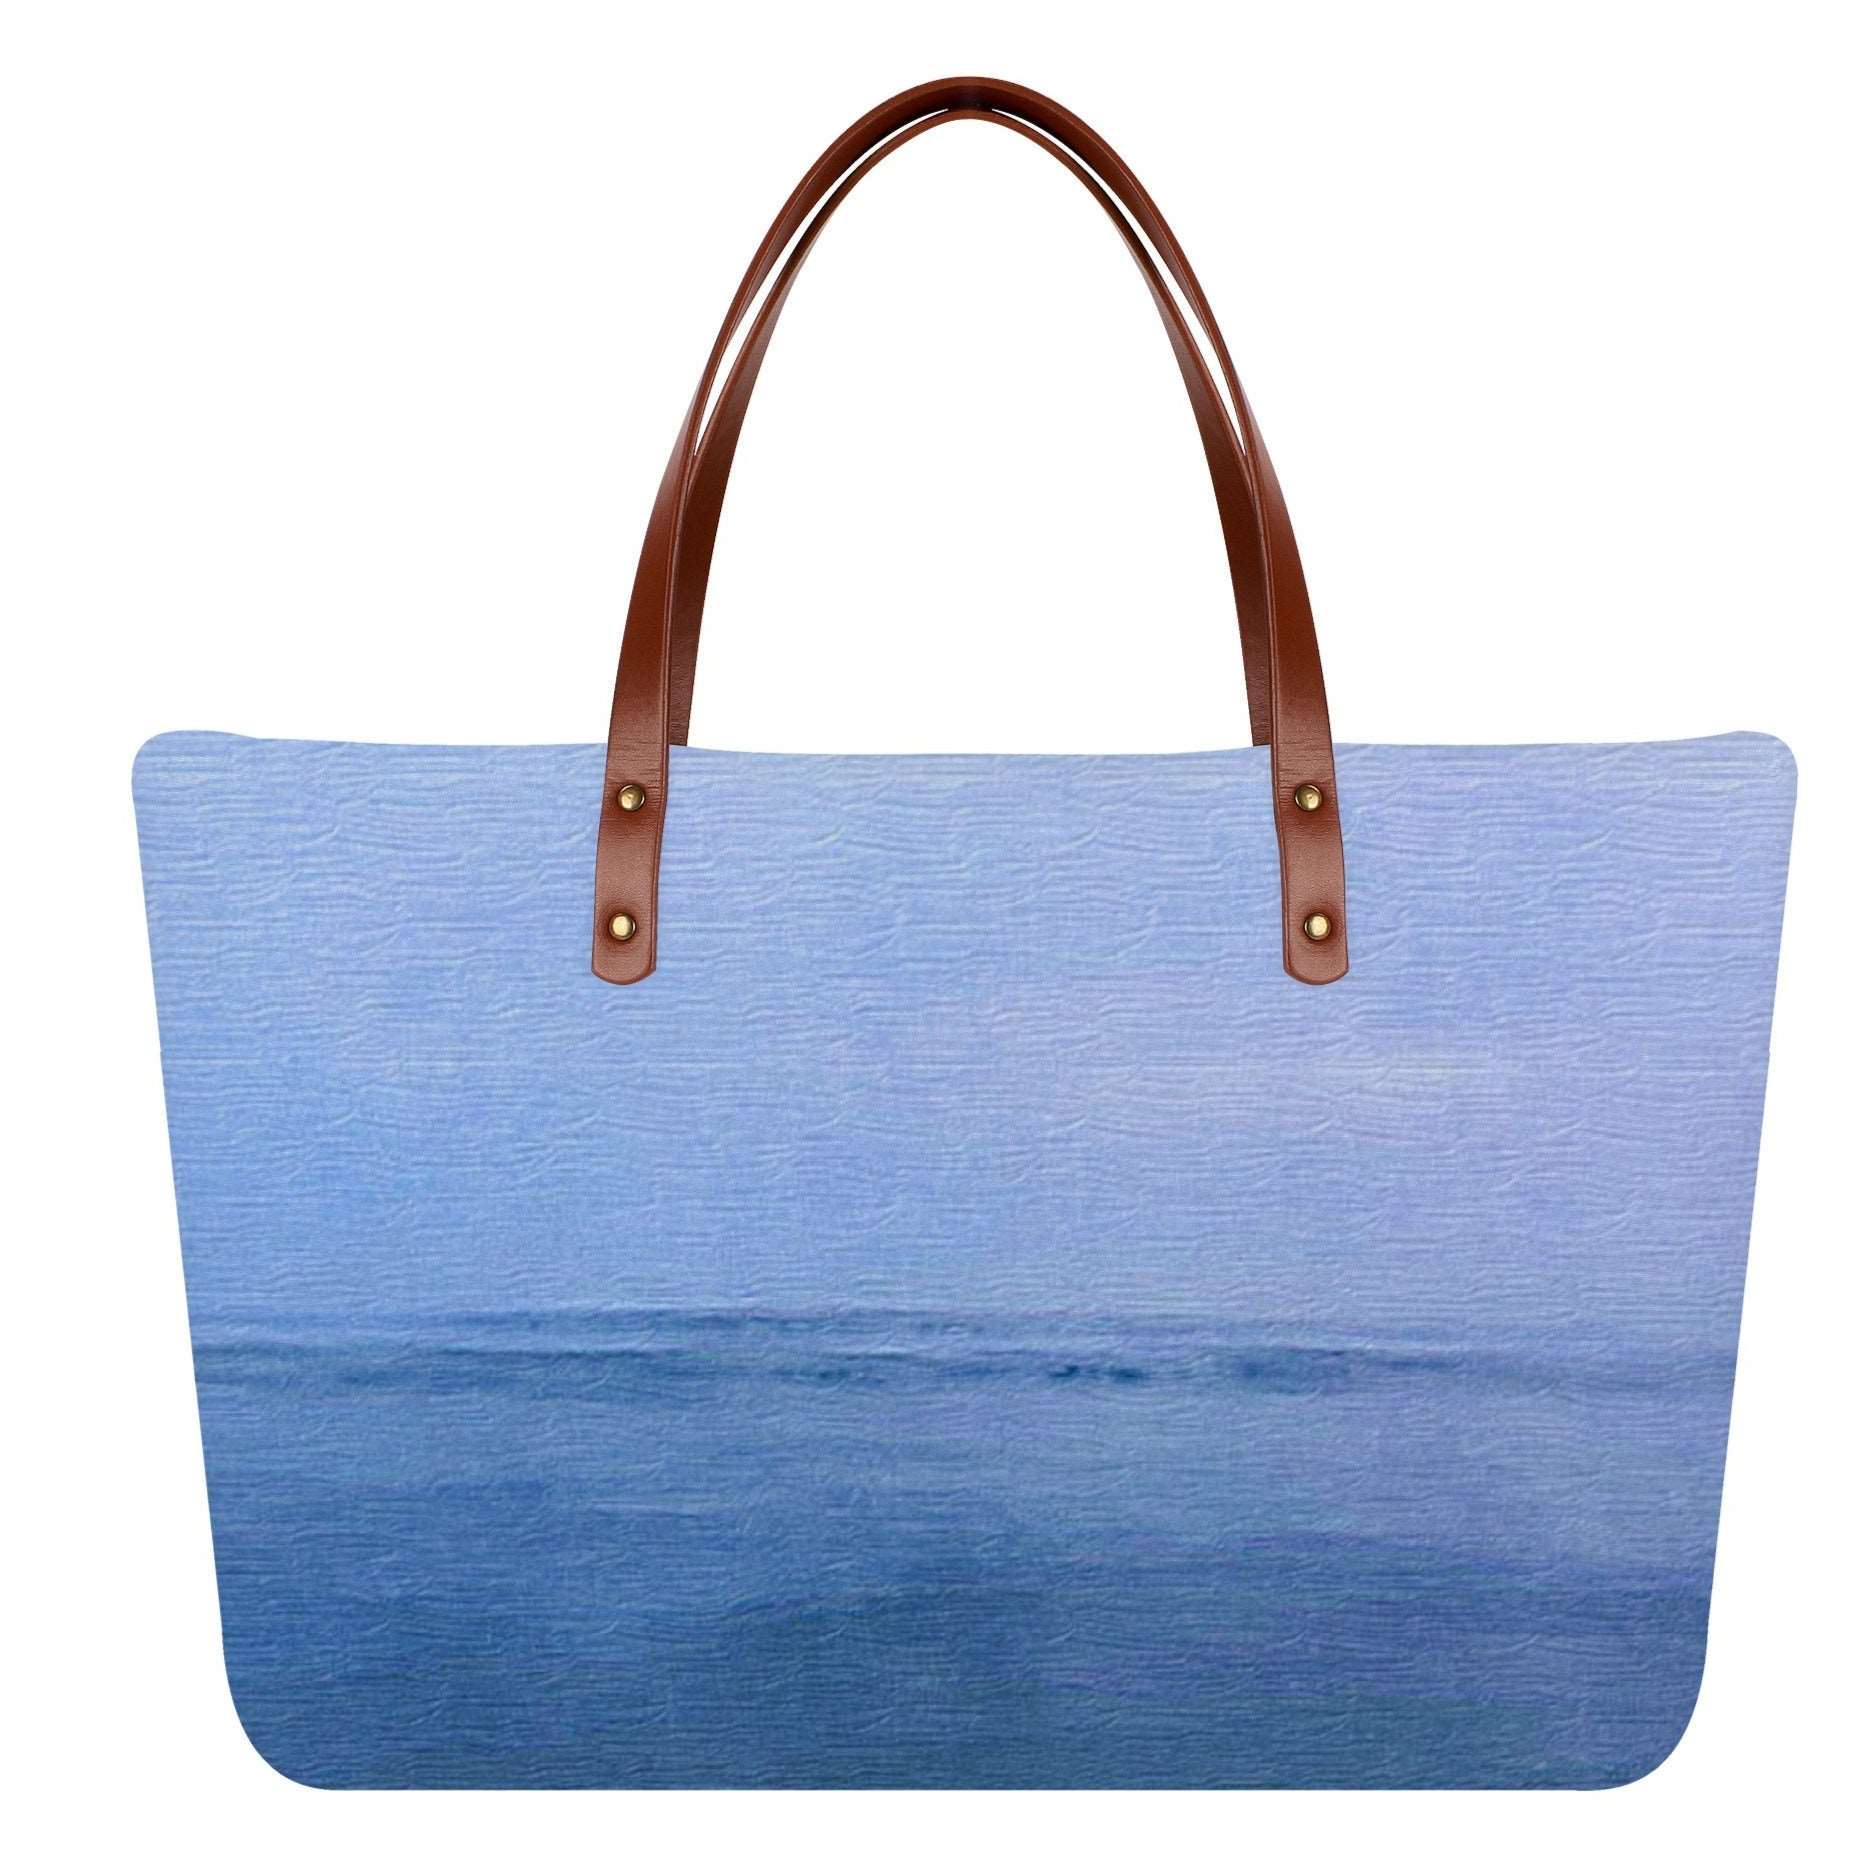 Blues of the Sea - Everyday Tote Bag